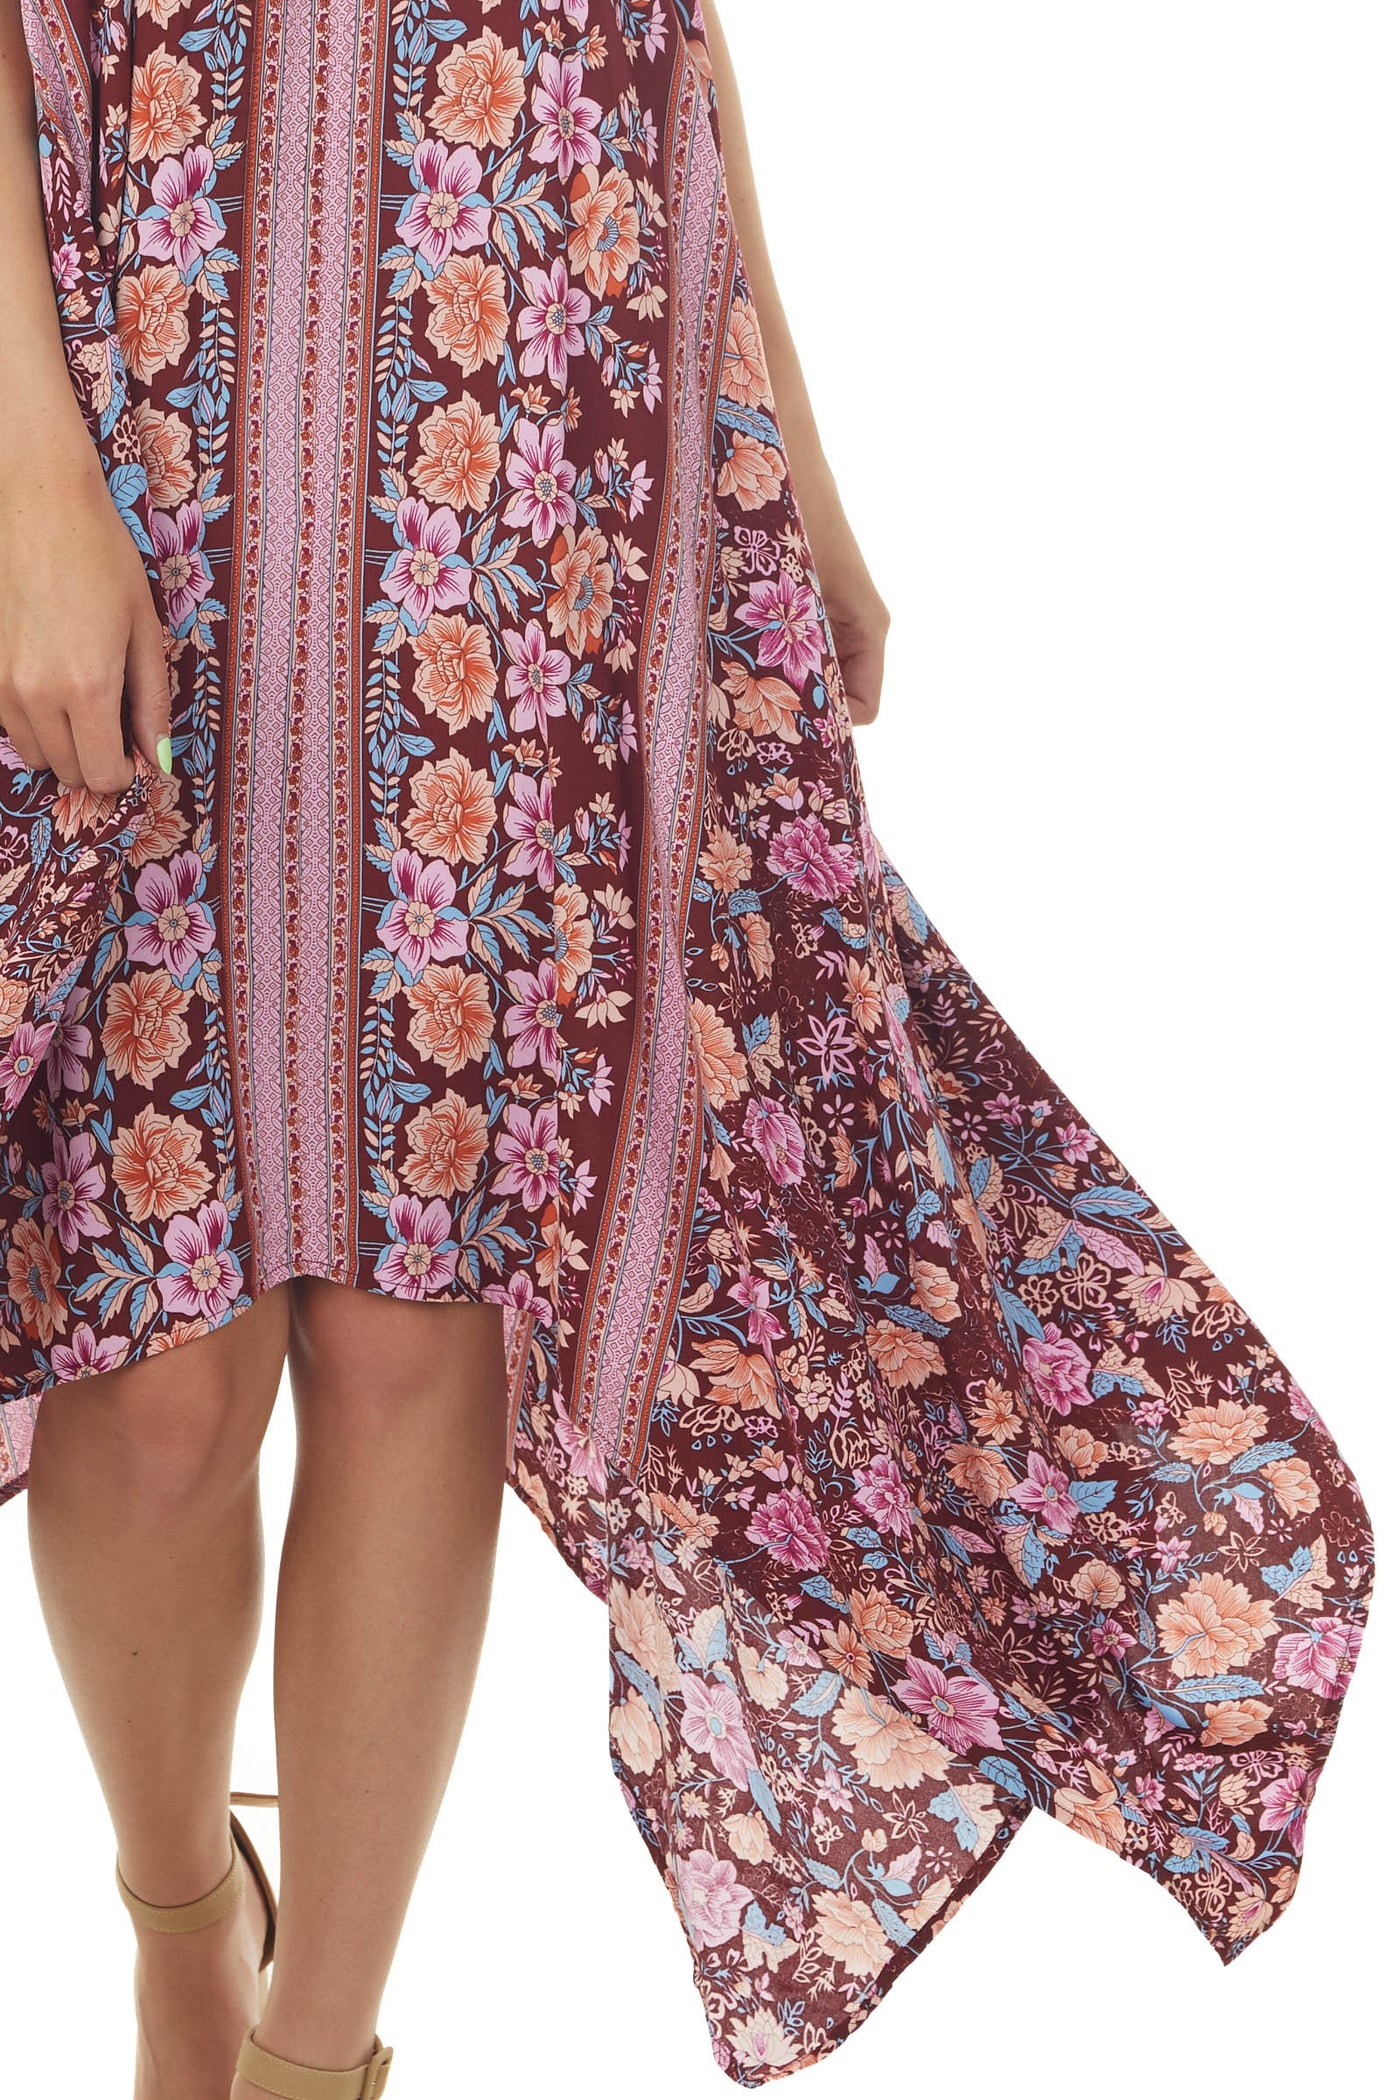 Sangria Floral and Abstract Sleeveless Dress